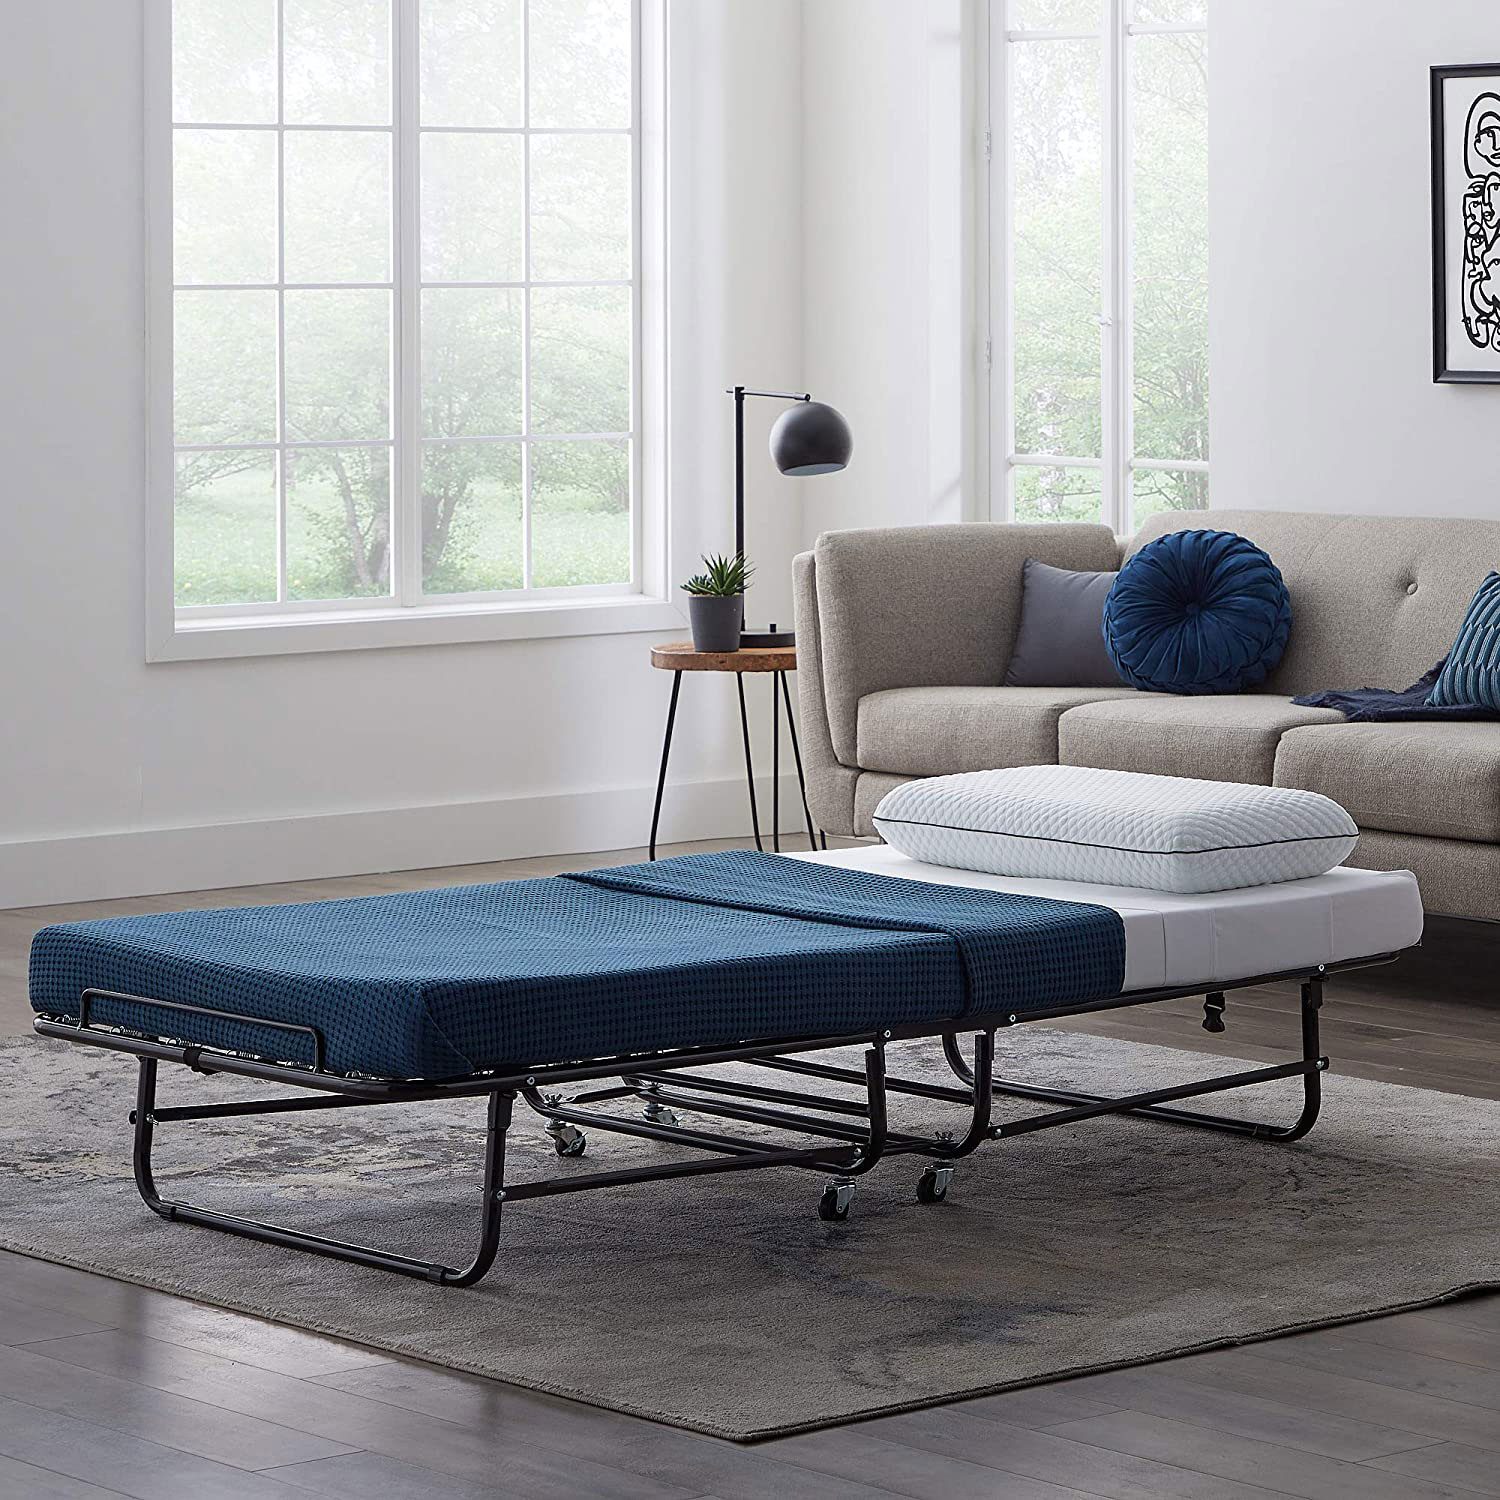 The Best Folding Beds For Hosting, Twin Size Folding Air Bed Frames